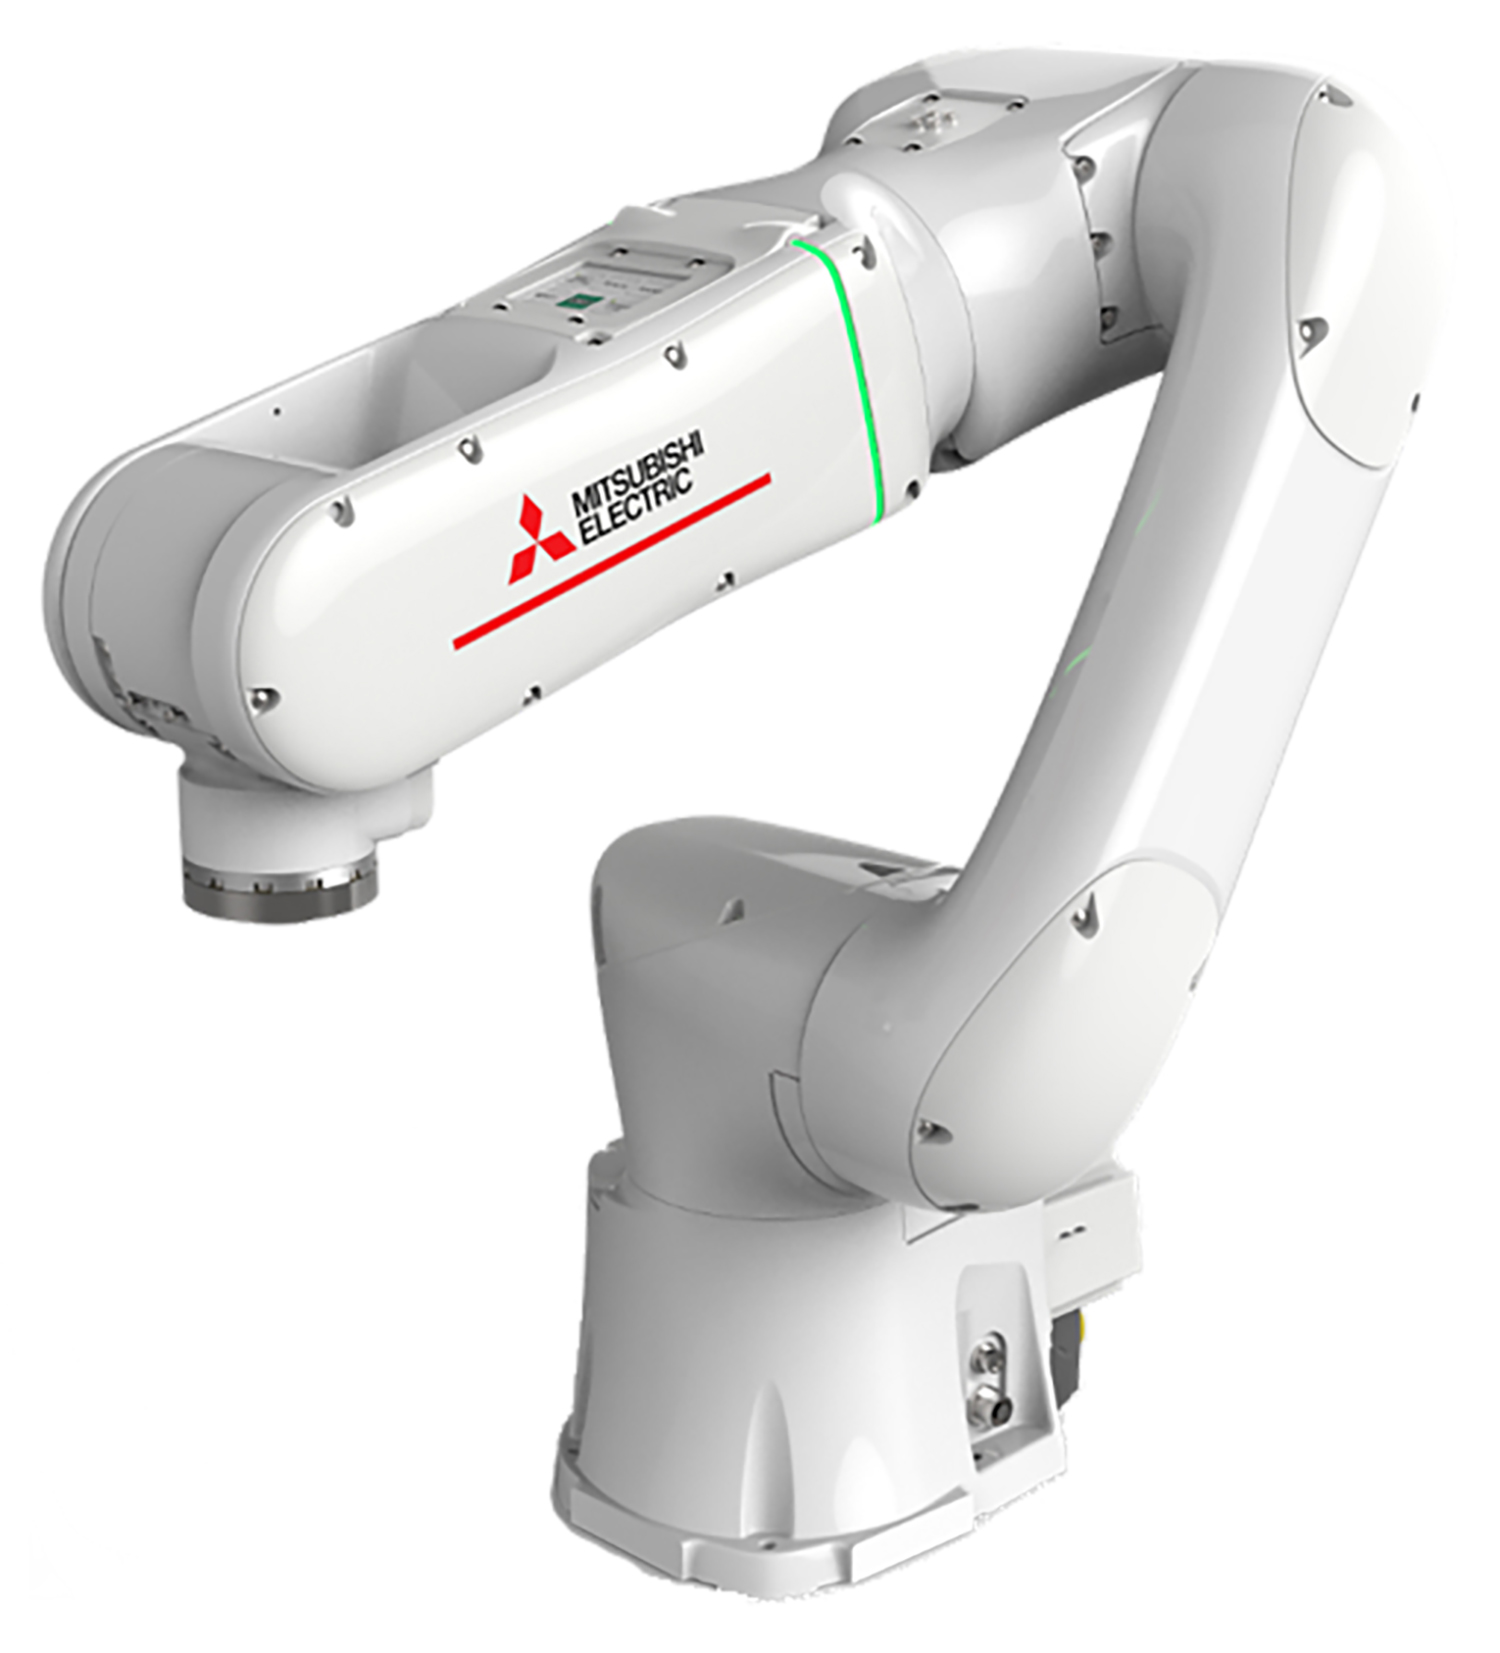 Humans collaborating with robots in manufacturing processes should be provided with maximum safety combined with ease of use, while meeting new requirements for adequate distancing of workers in manufacturing sites.